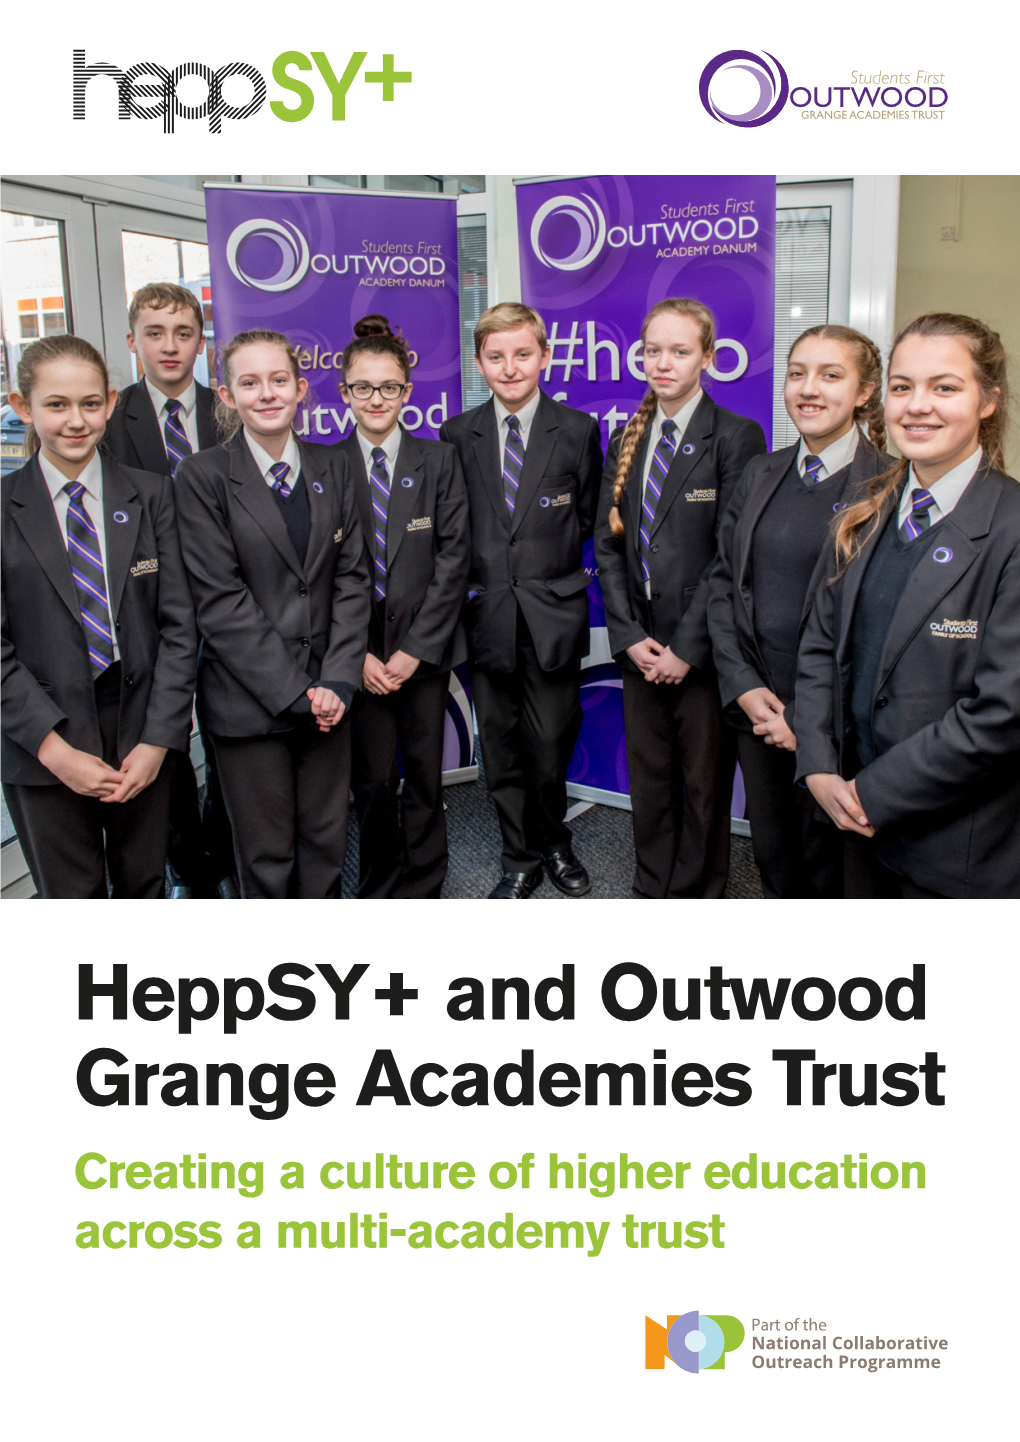 Heppsy+ and Outwood Grange Academies Trust Creating a Culture of Higher Education Across a Multi-Academy Trust